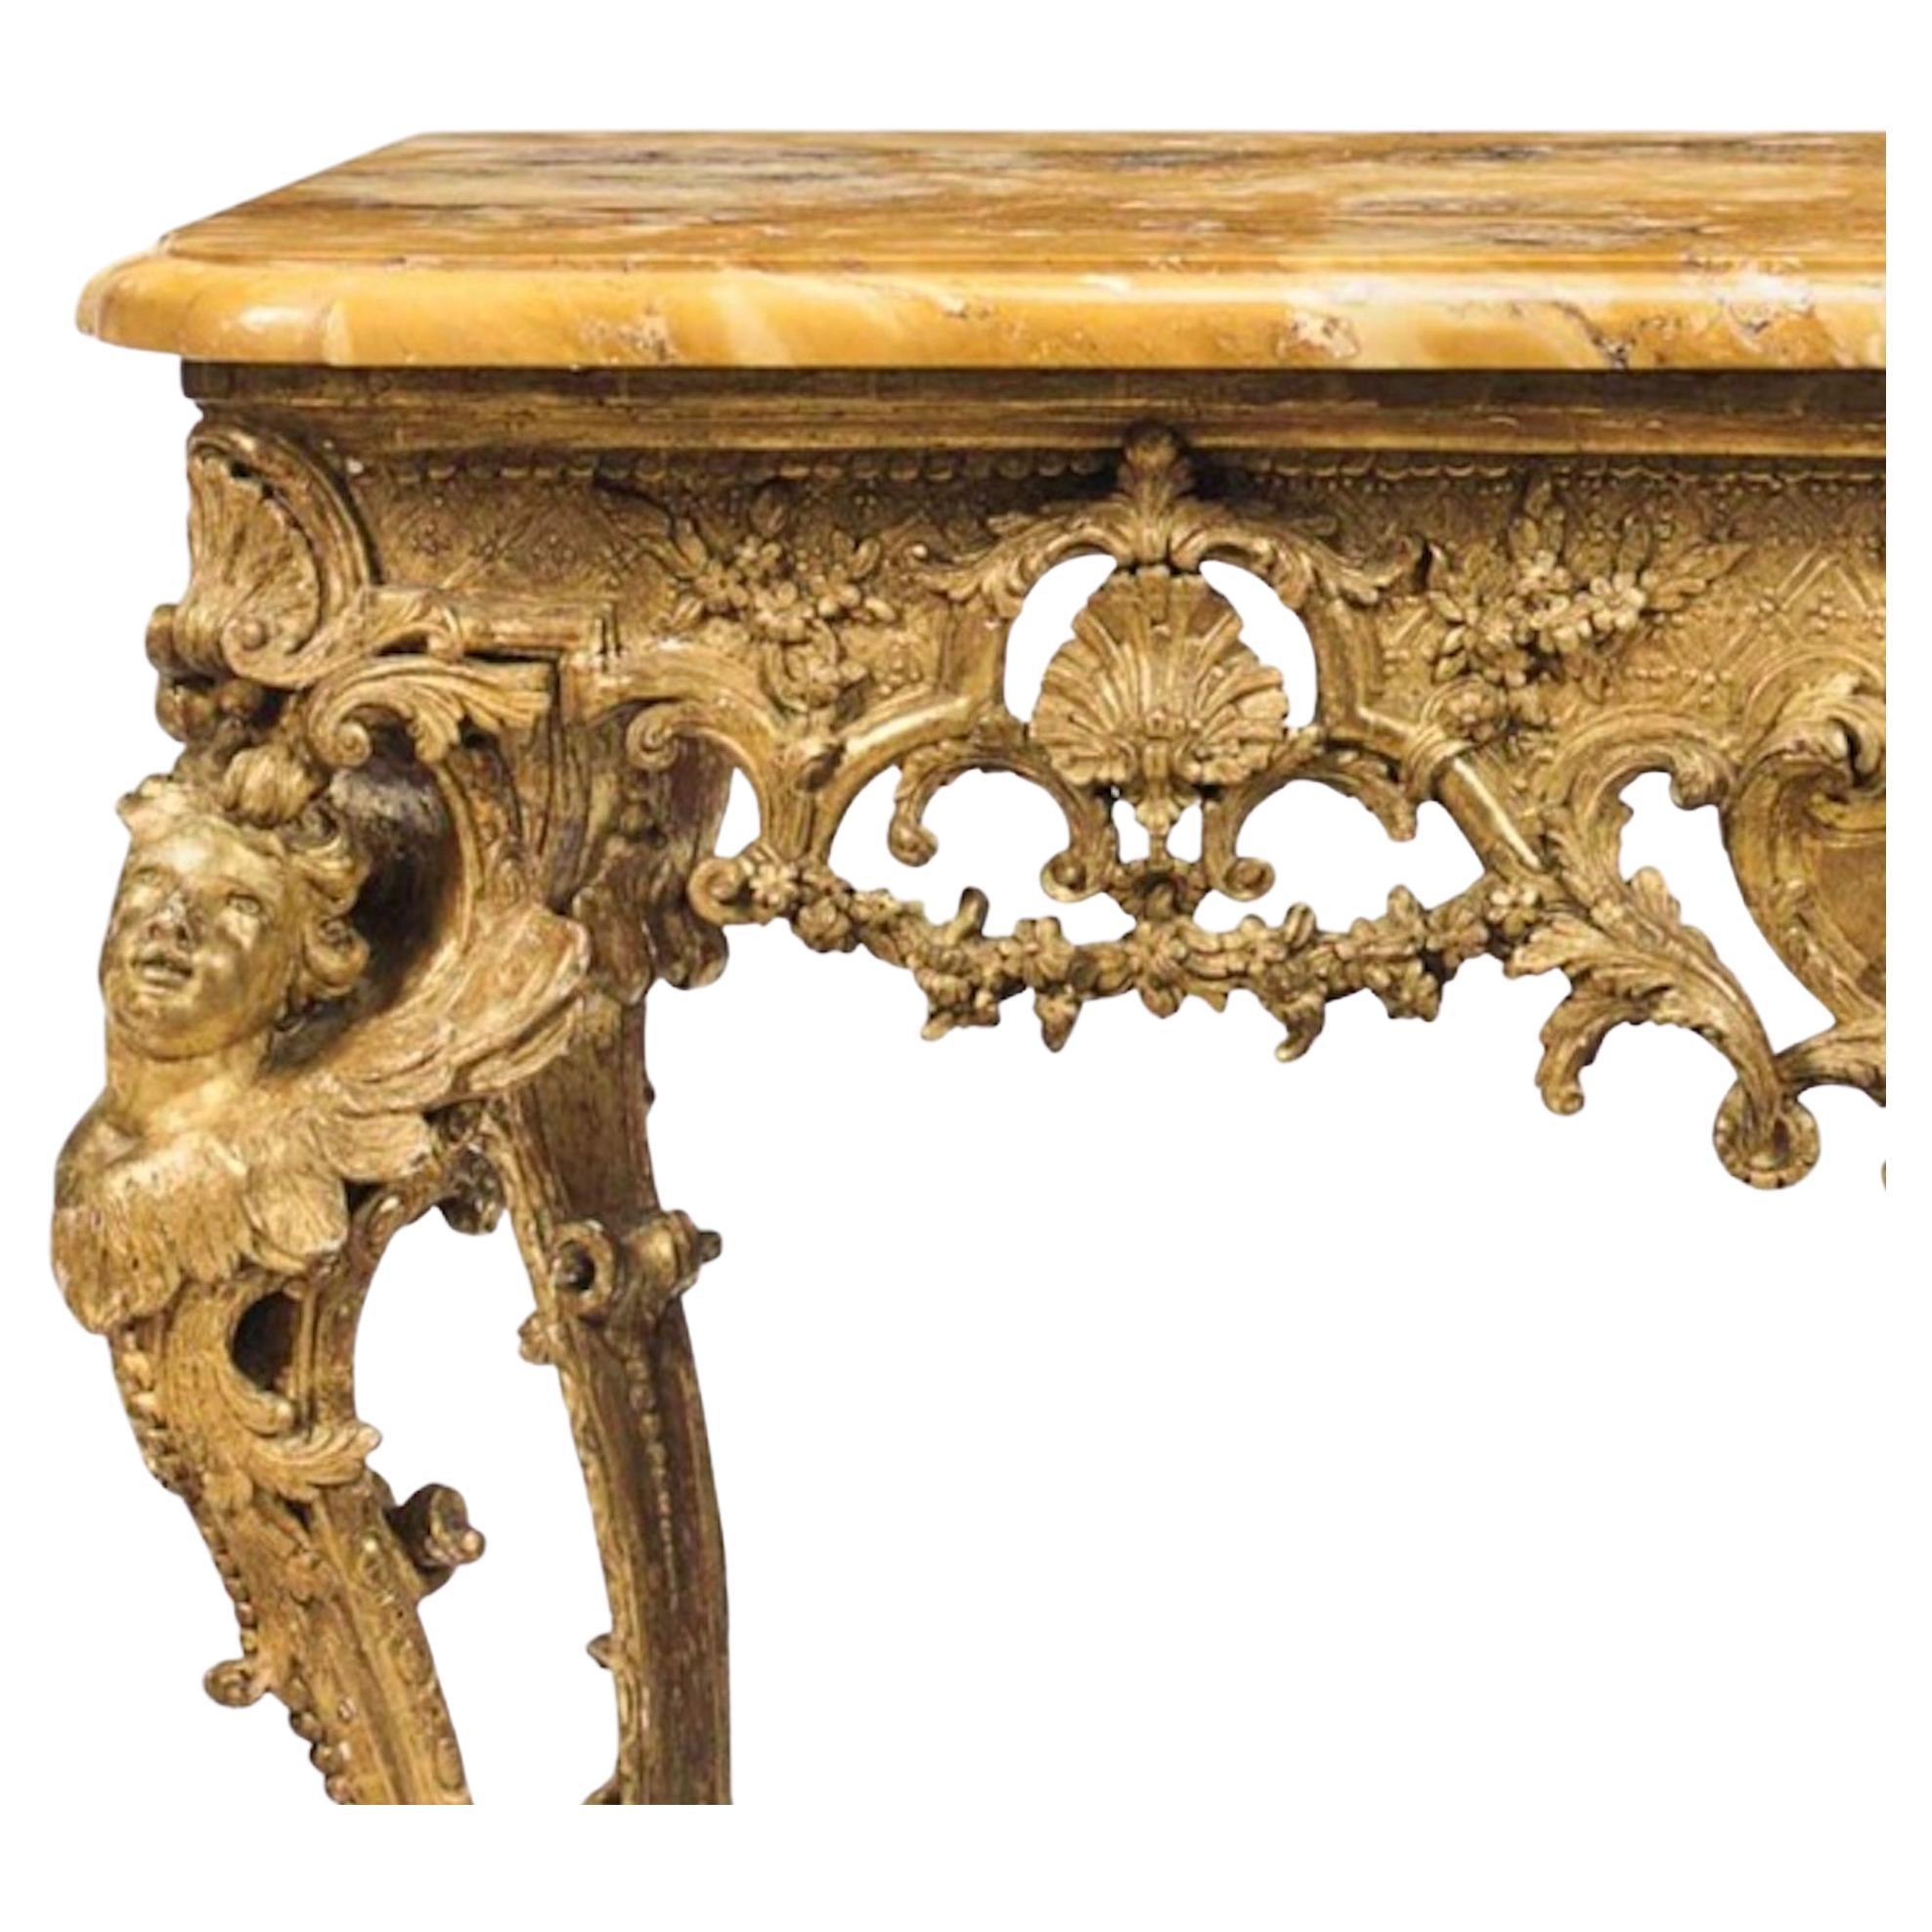 Regency 18th Century Régence Period Giltwood and Sienna Marble Console, circa 1720-1725 For Sale